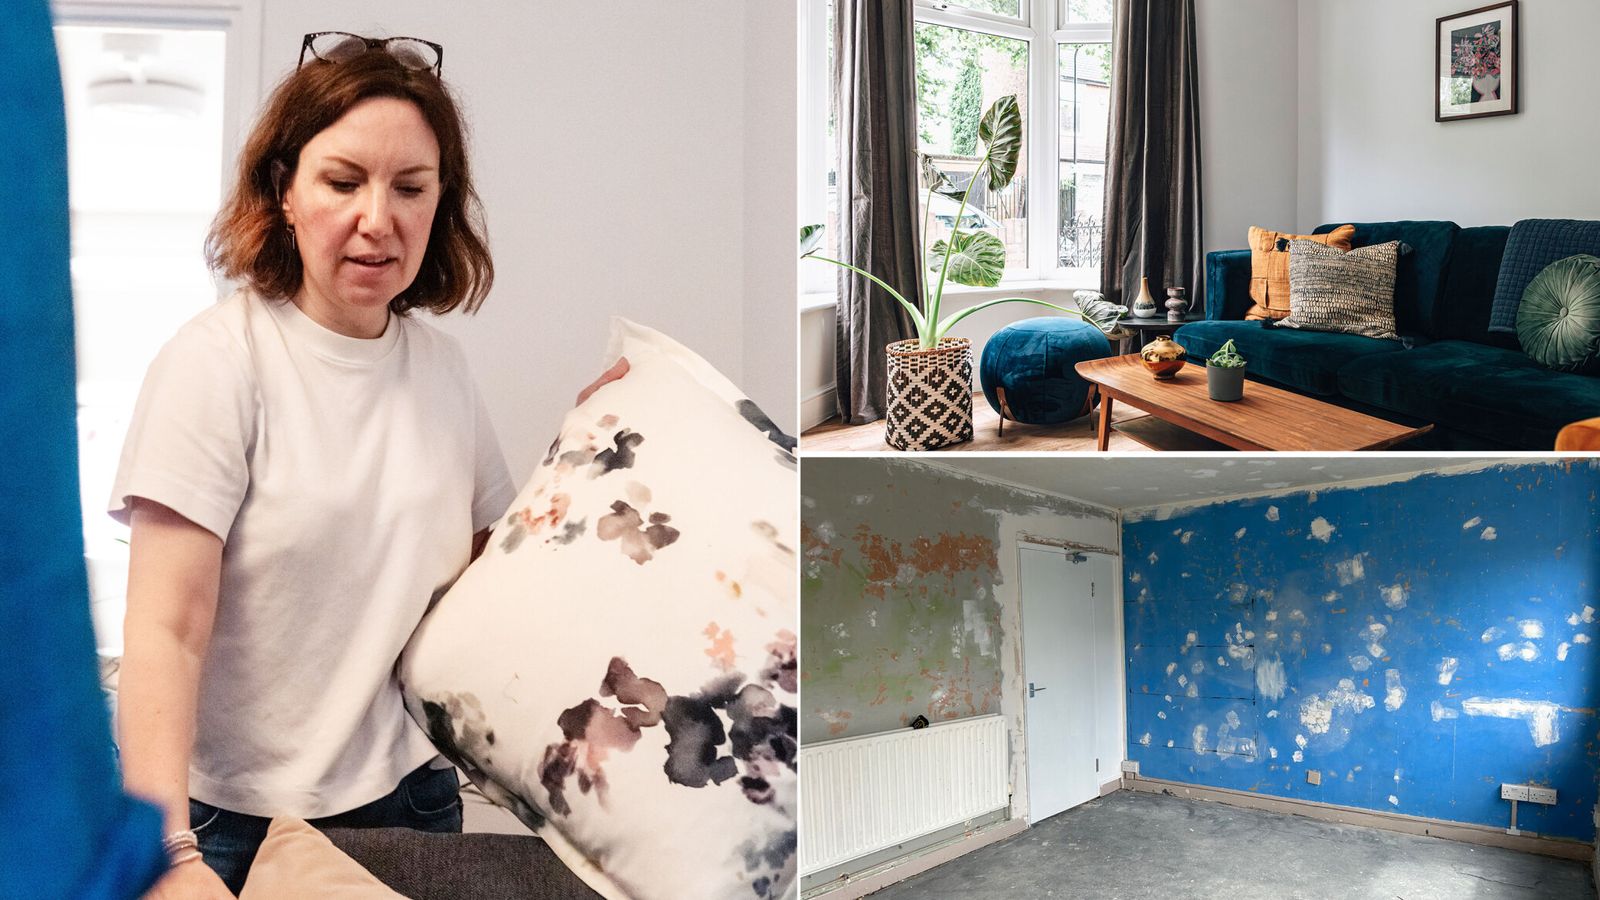 Meet the woman furnishing homes for domestic abuse survivors given empty flats with no beds